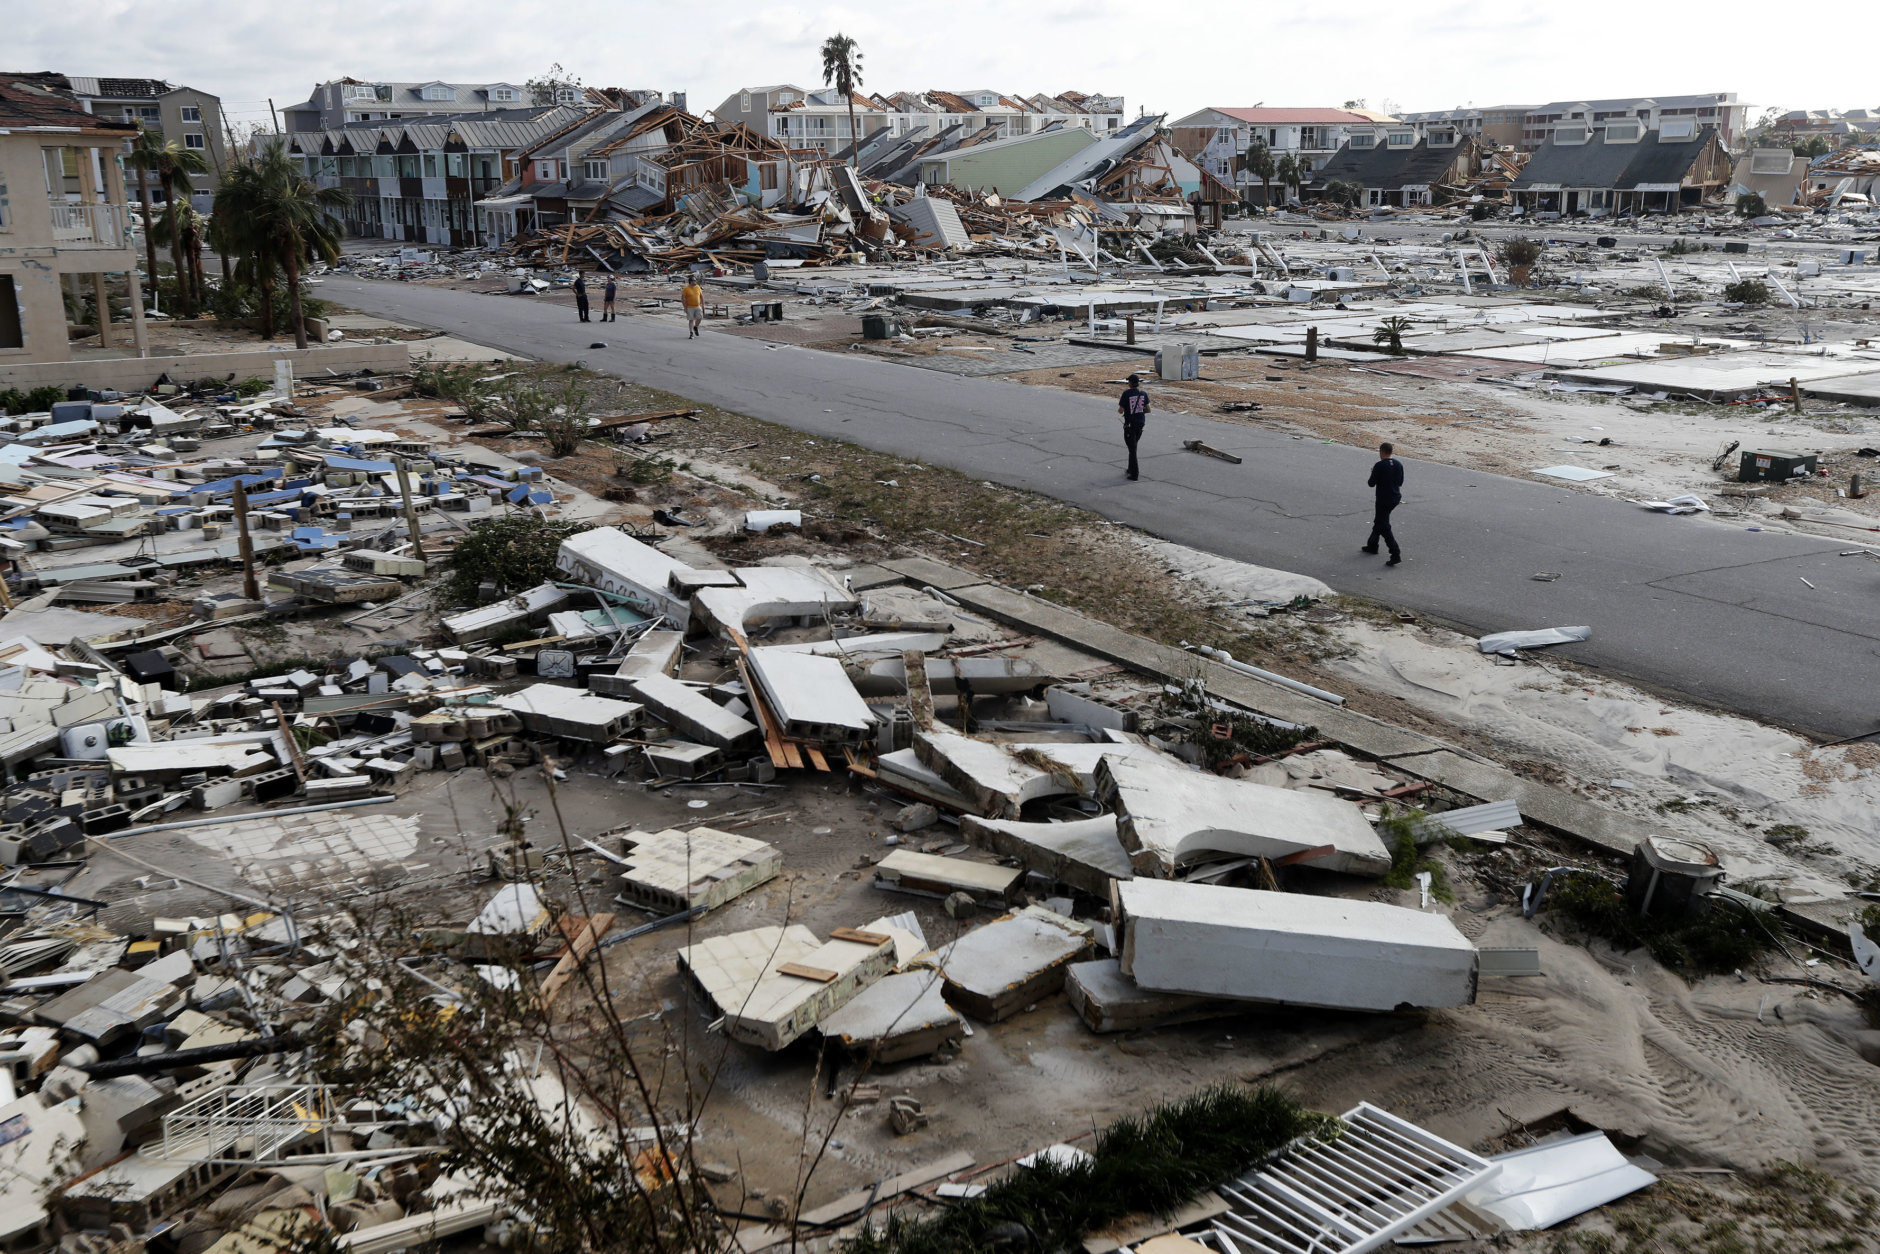 Rescue personnel search through debris in the aftermath of Hurricane Michael in Mexico Beach, Fla., on Oct. 11, 2018. (AP Photo/Gerald Herbert)